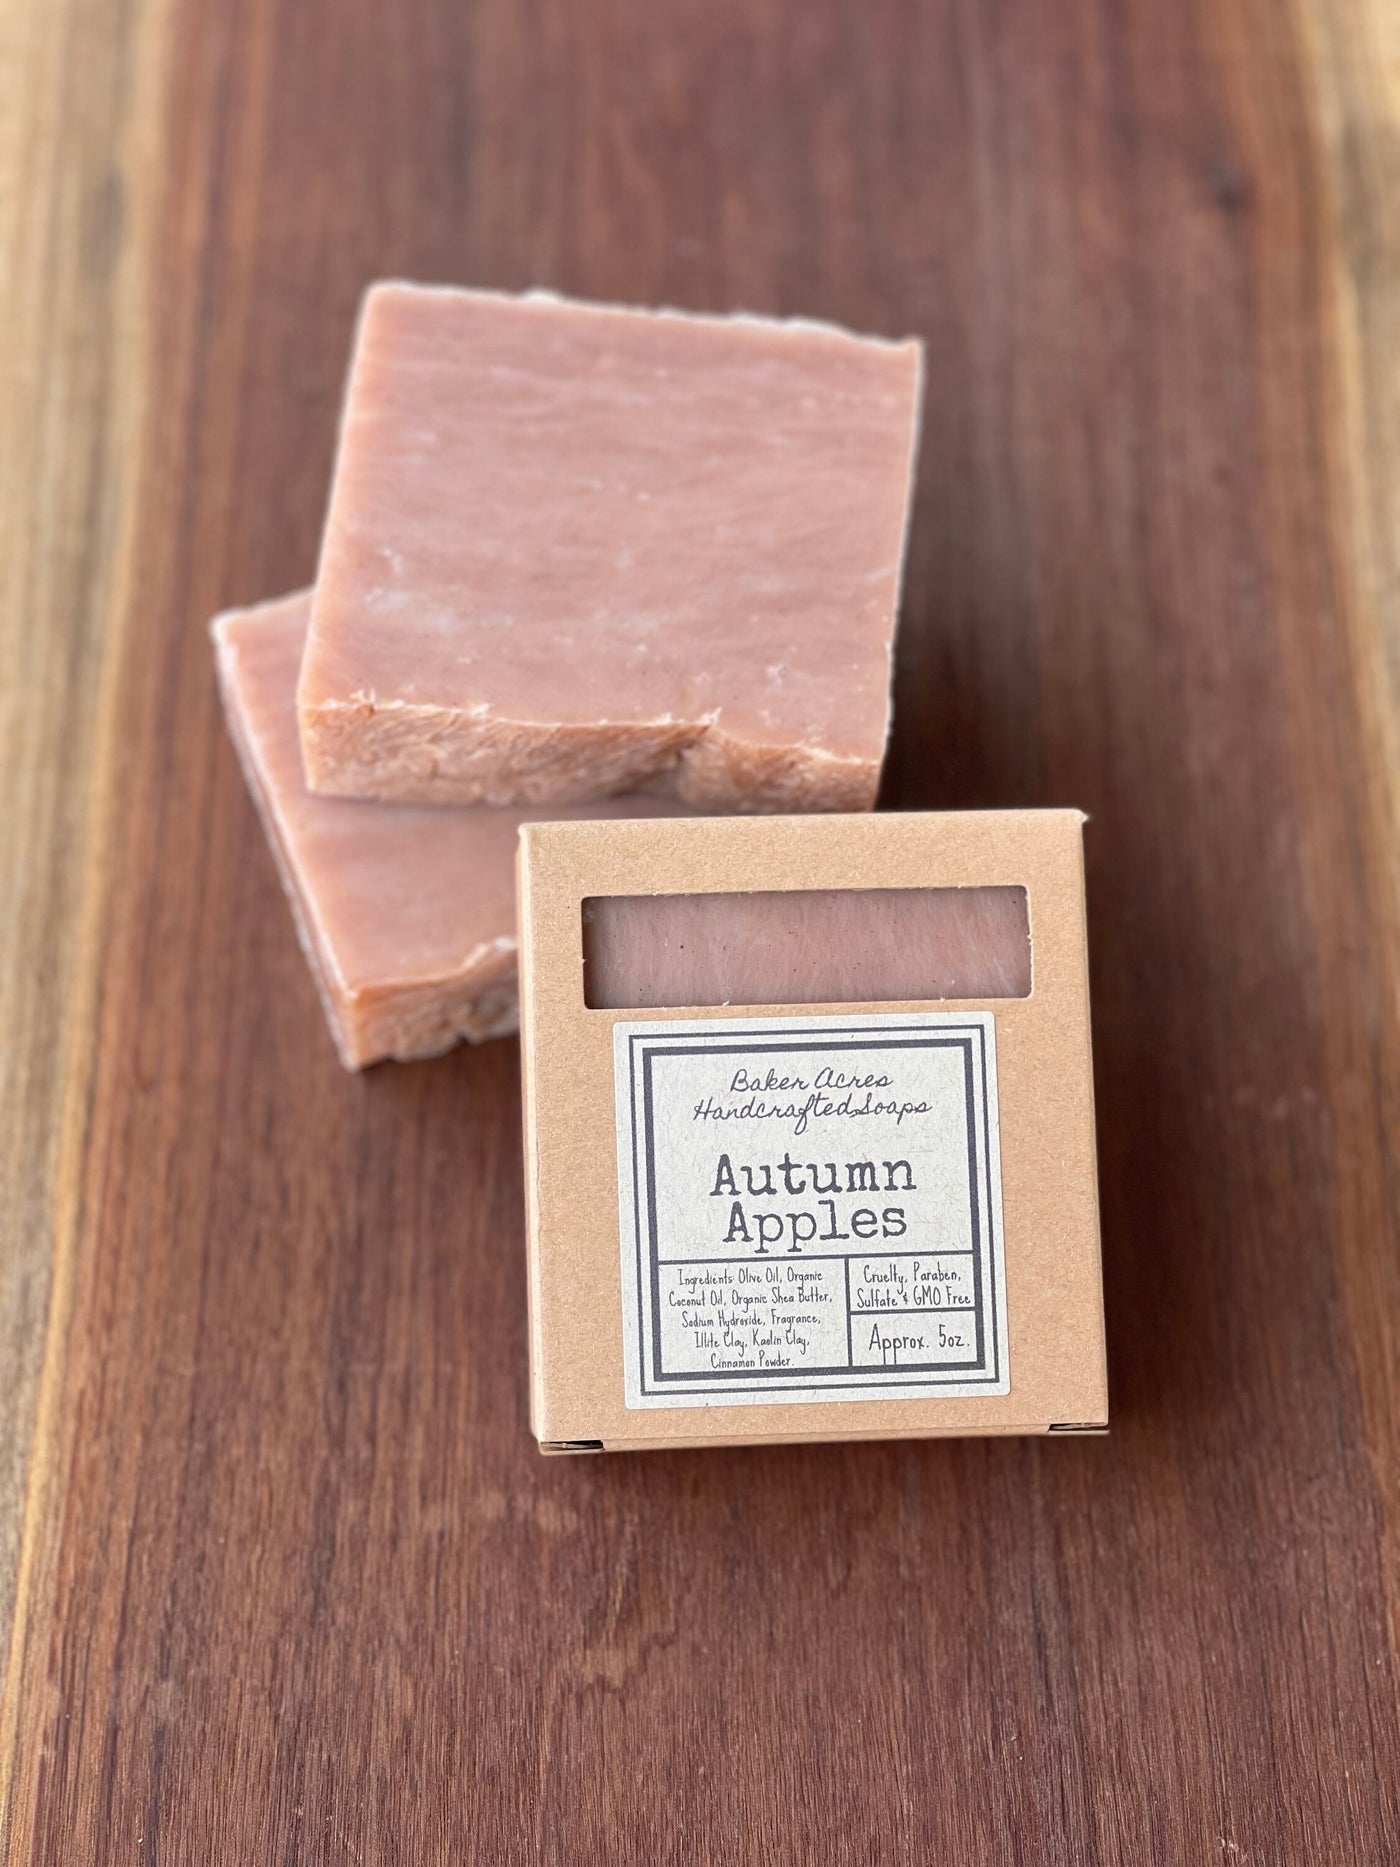 Autumn Apples Handcrafted Soap